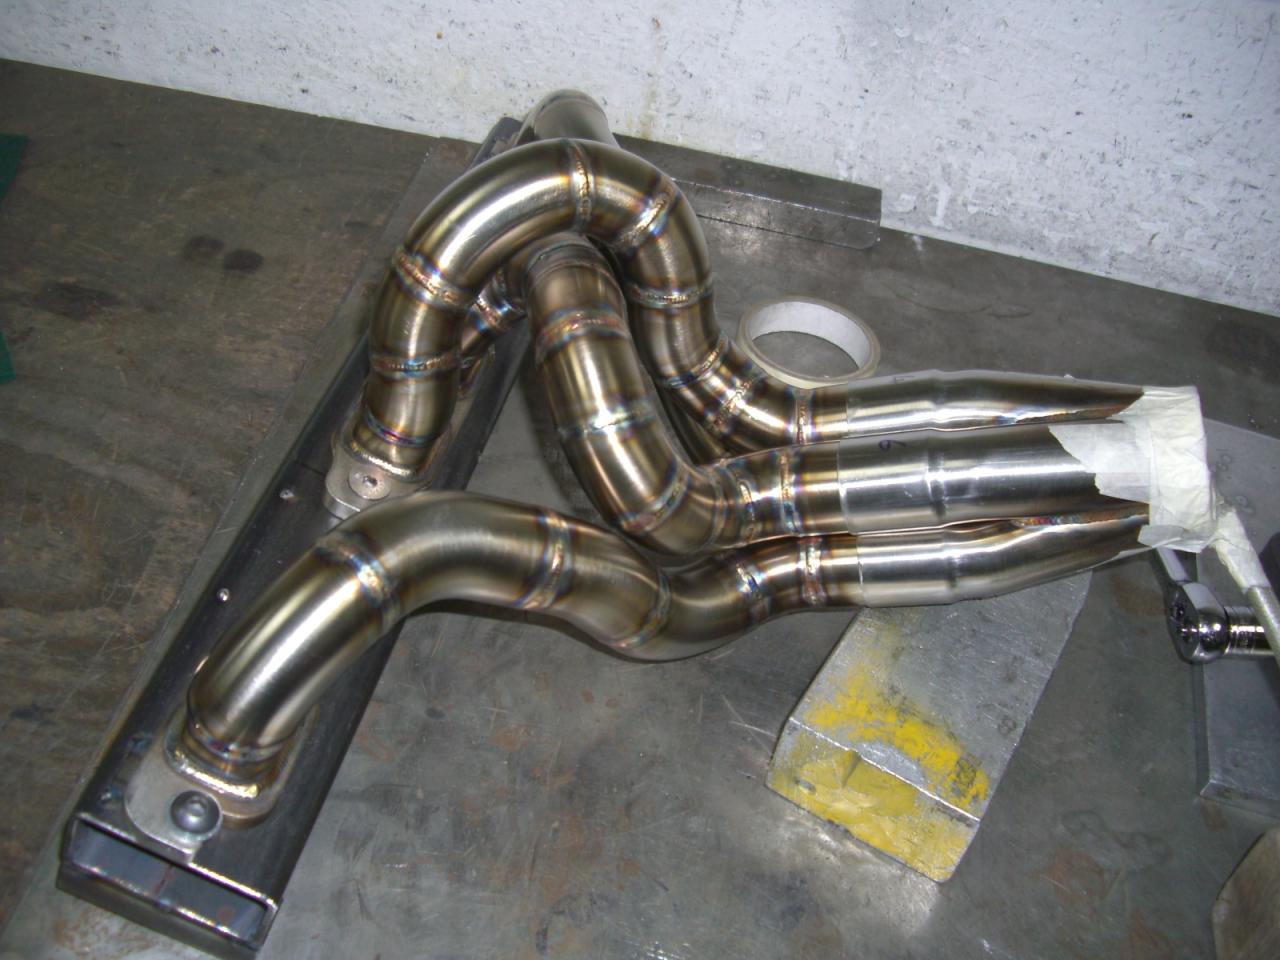 RS Fabrications made some nice headers. As well as the rest of the exhaust system.